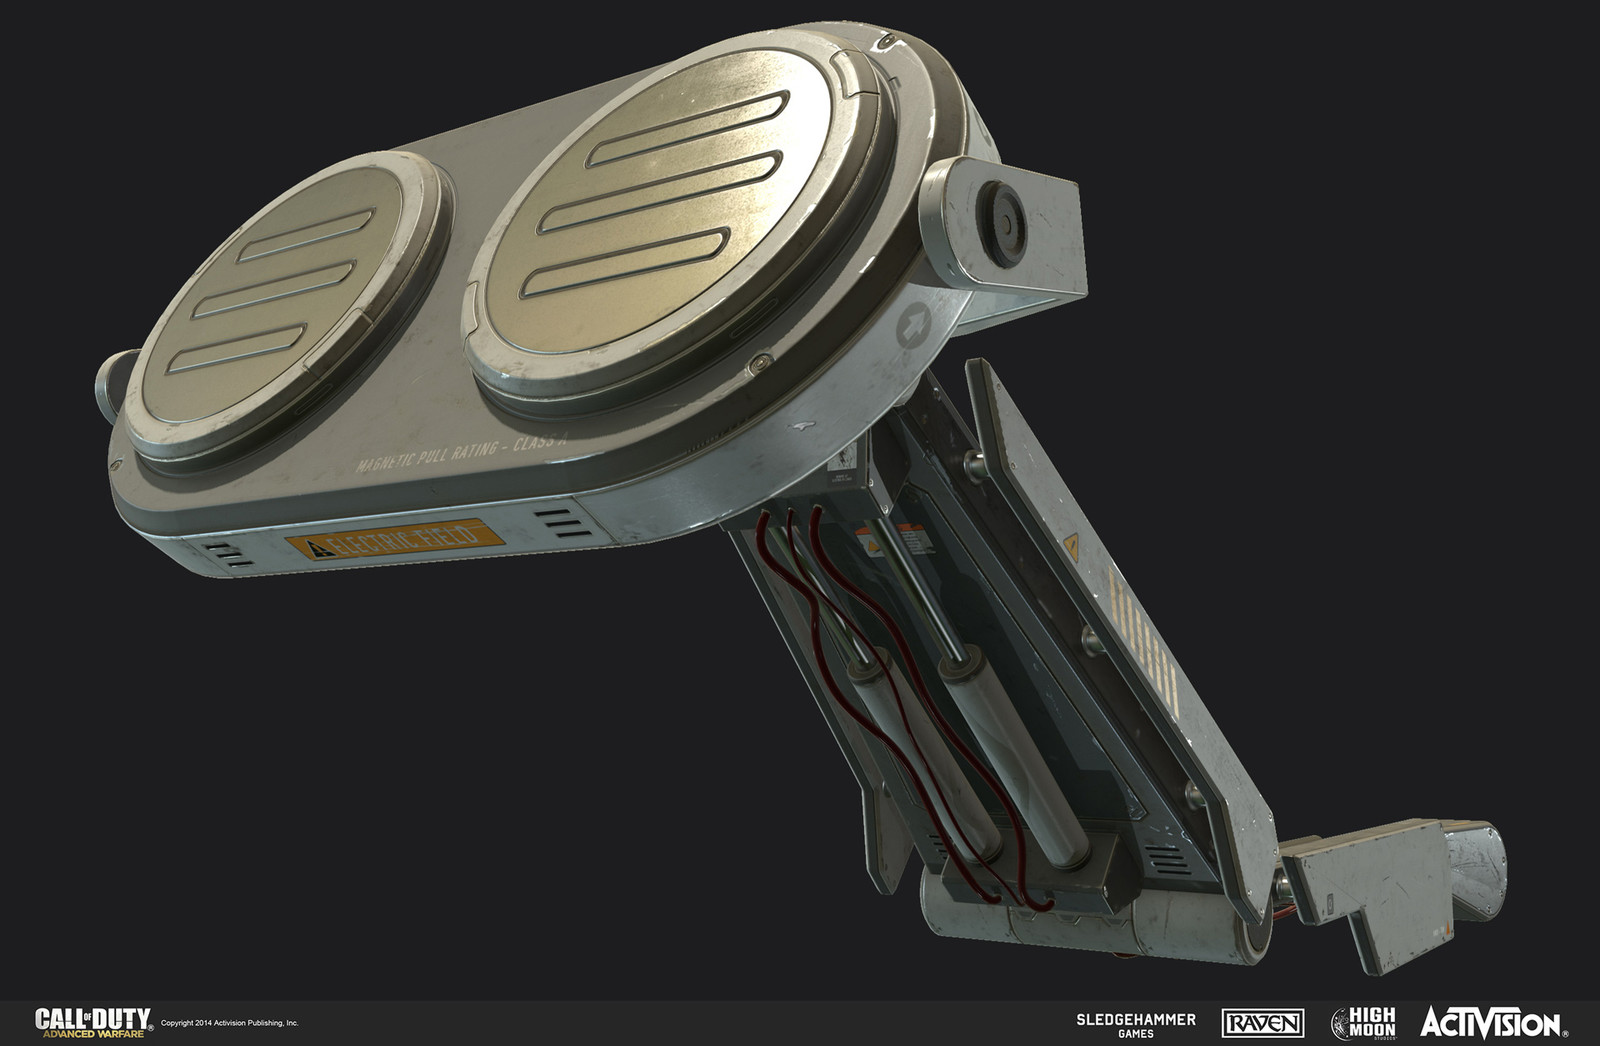 Ship support prop created for "Horizon" multiplayer map.